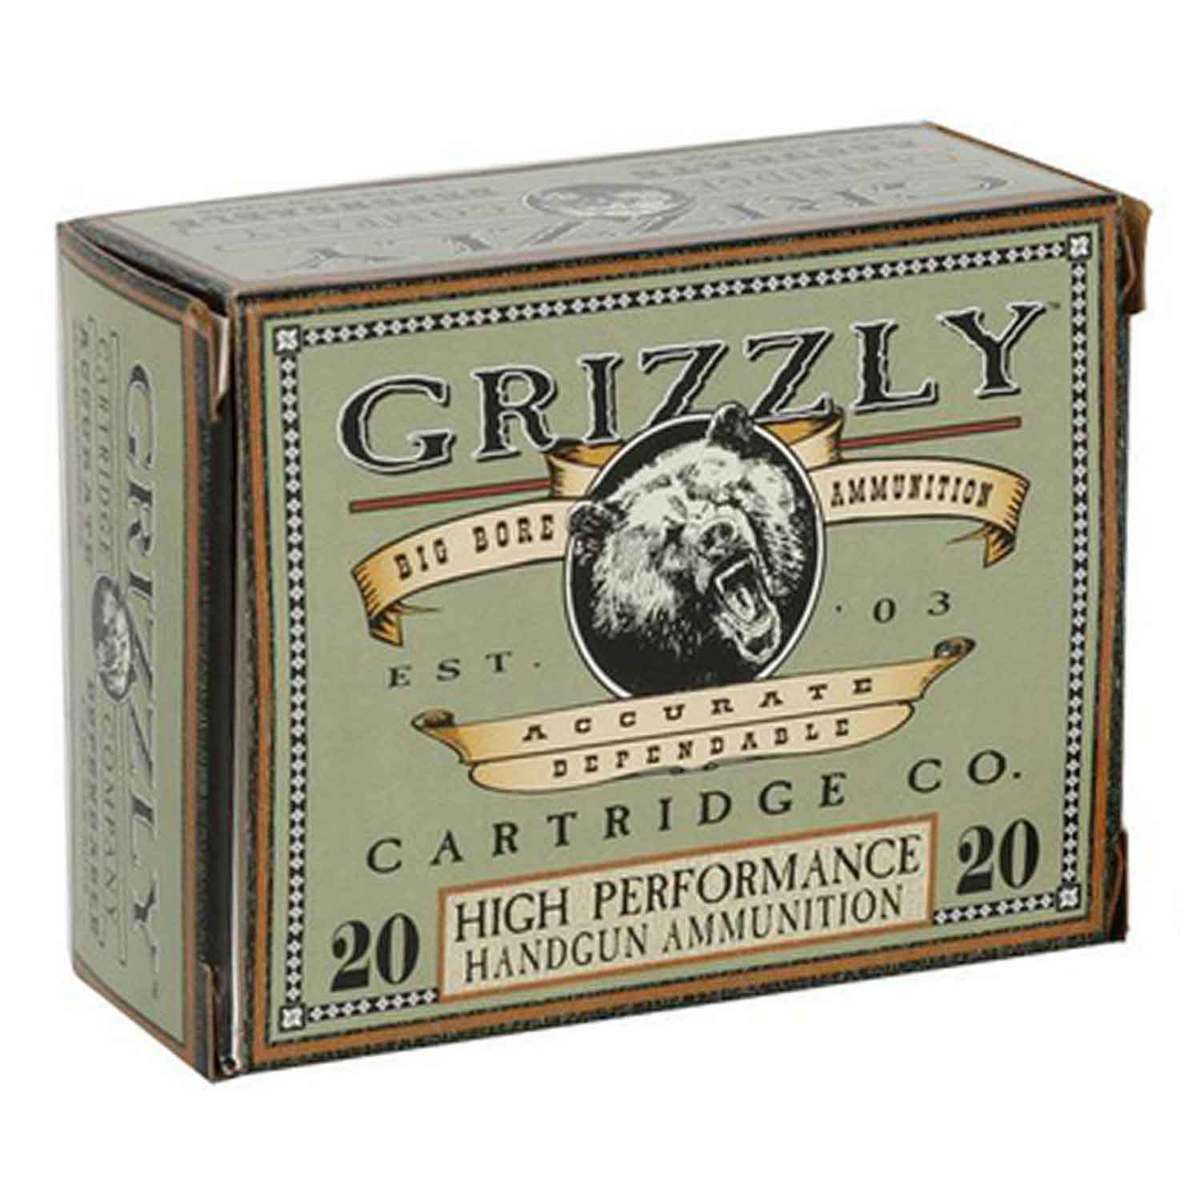 Grizzly H7931 #20 Wood Biscuits, 100 Pk.